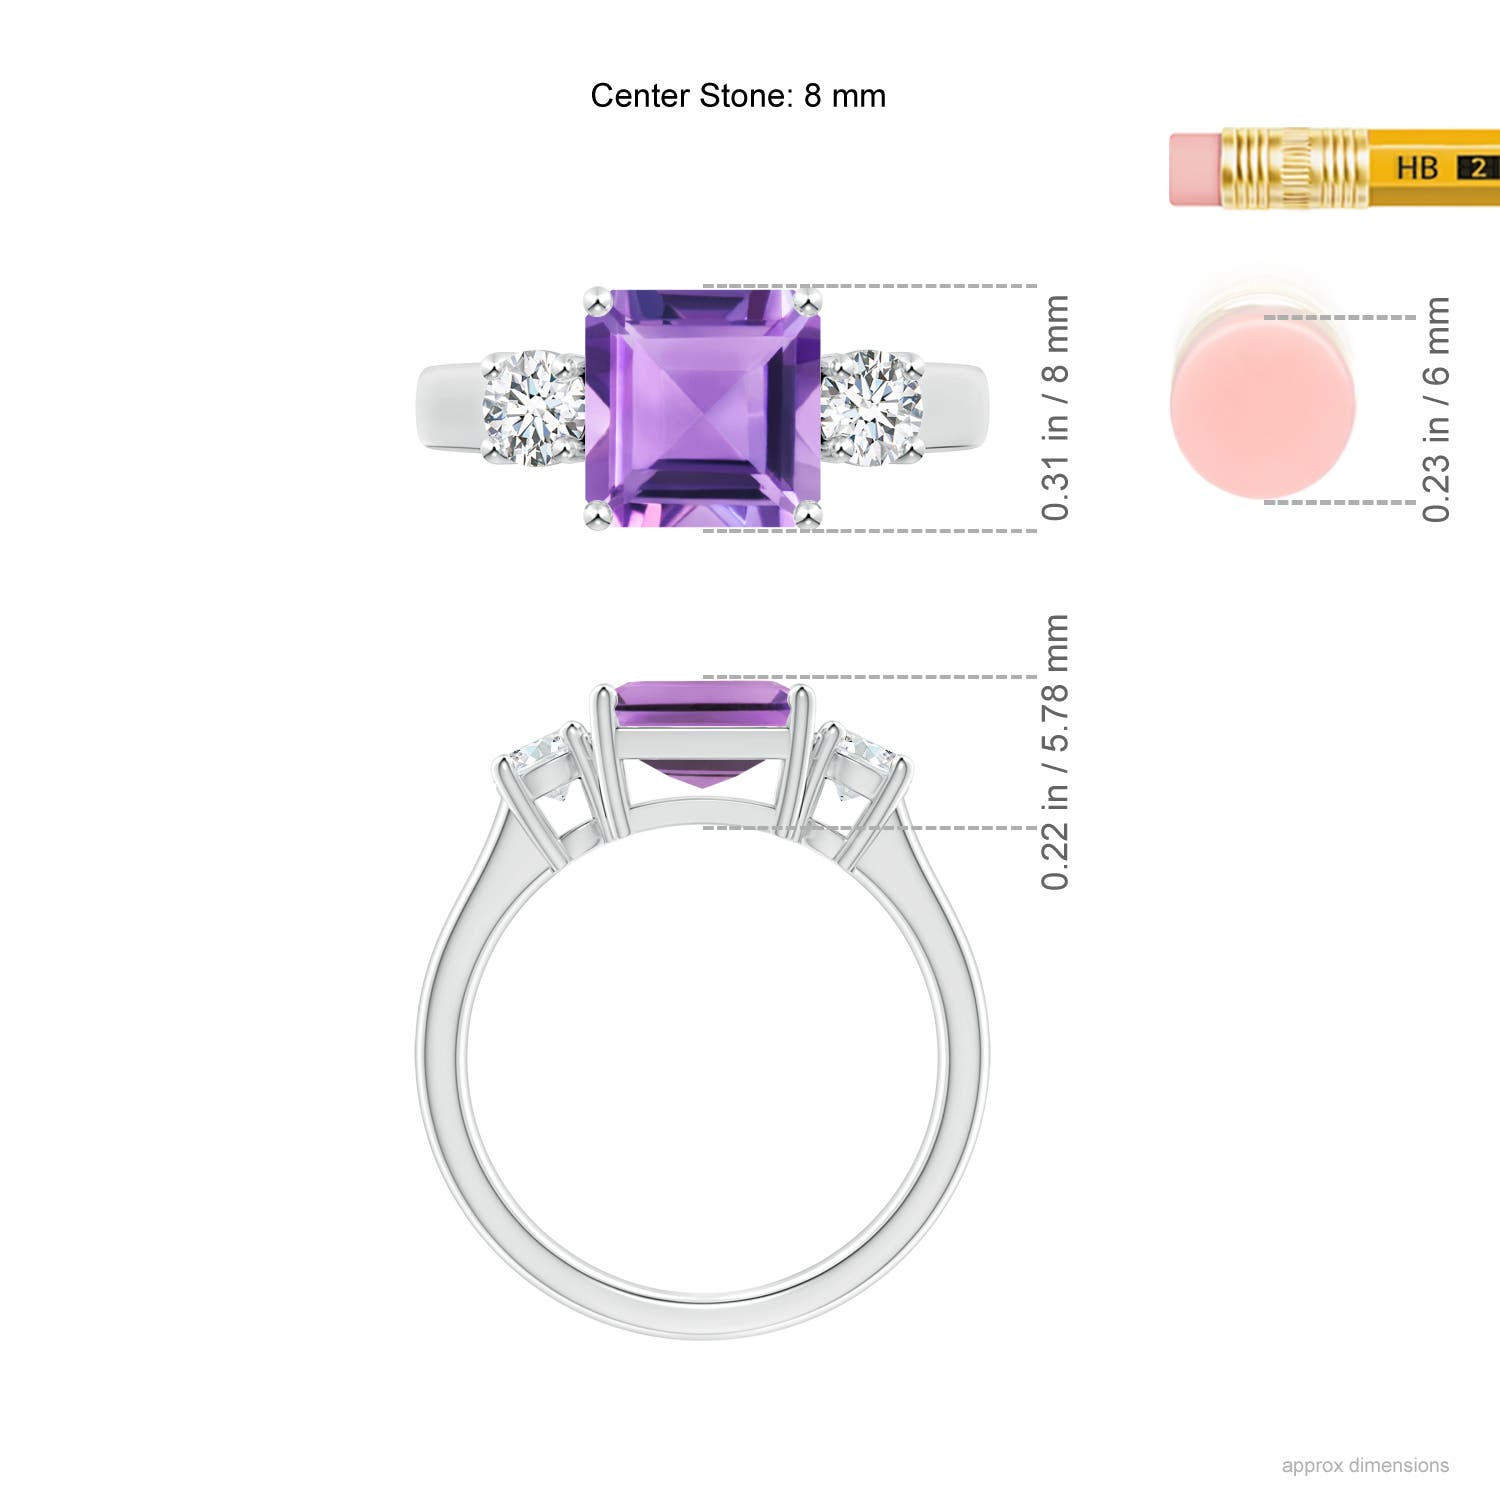 A - Amethyst / 2.46 CT / 14 KT White Gold